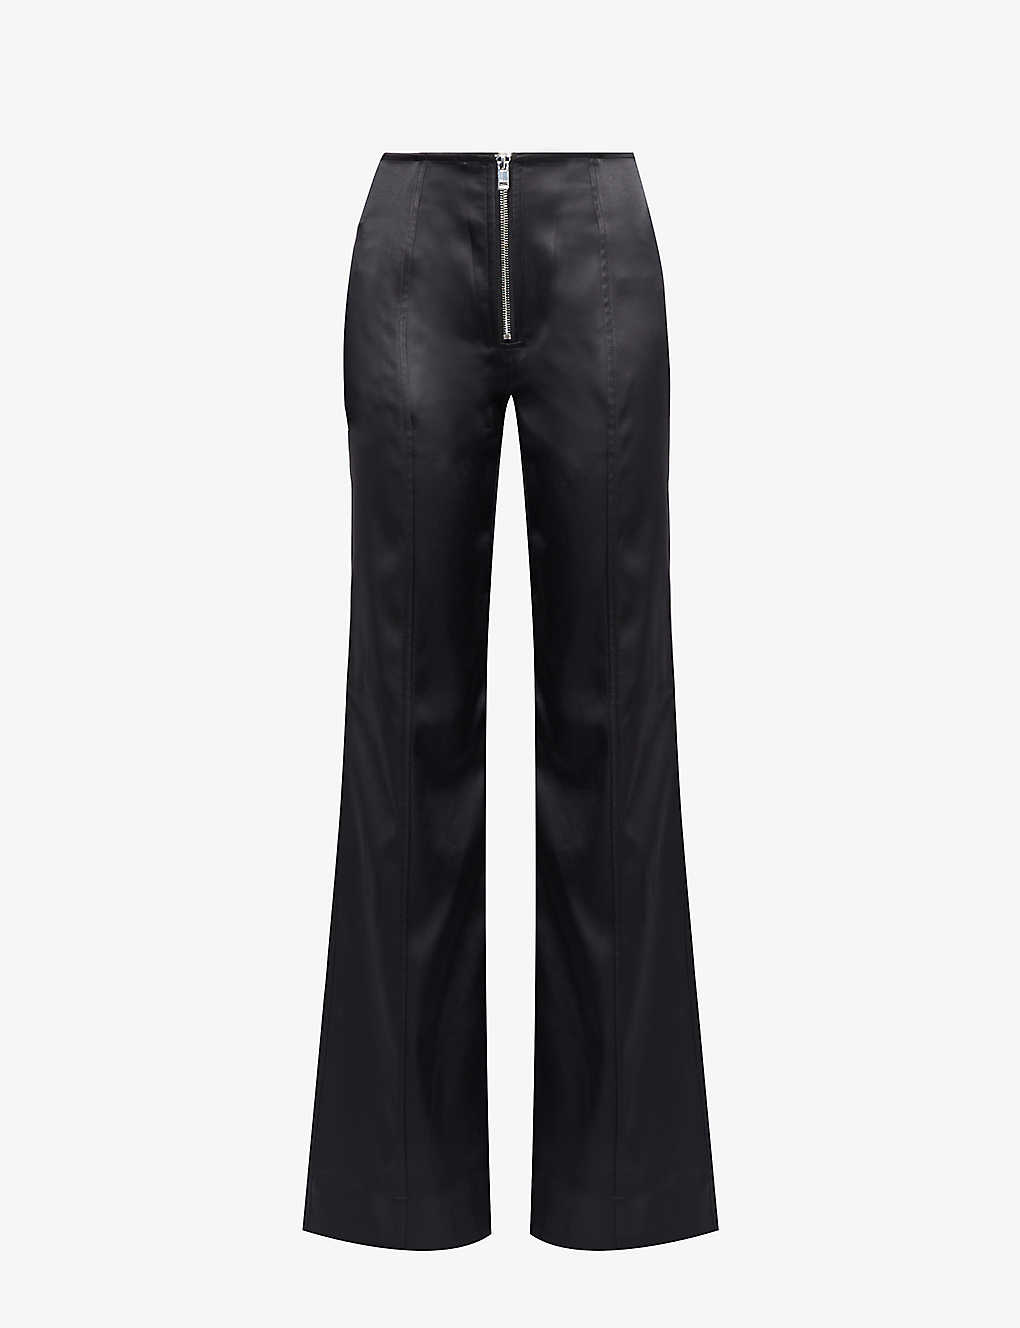 Shop Ganni Women's Black Satin-texture Straight-leg High-rise Stretch Recycled-polyester Trousers